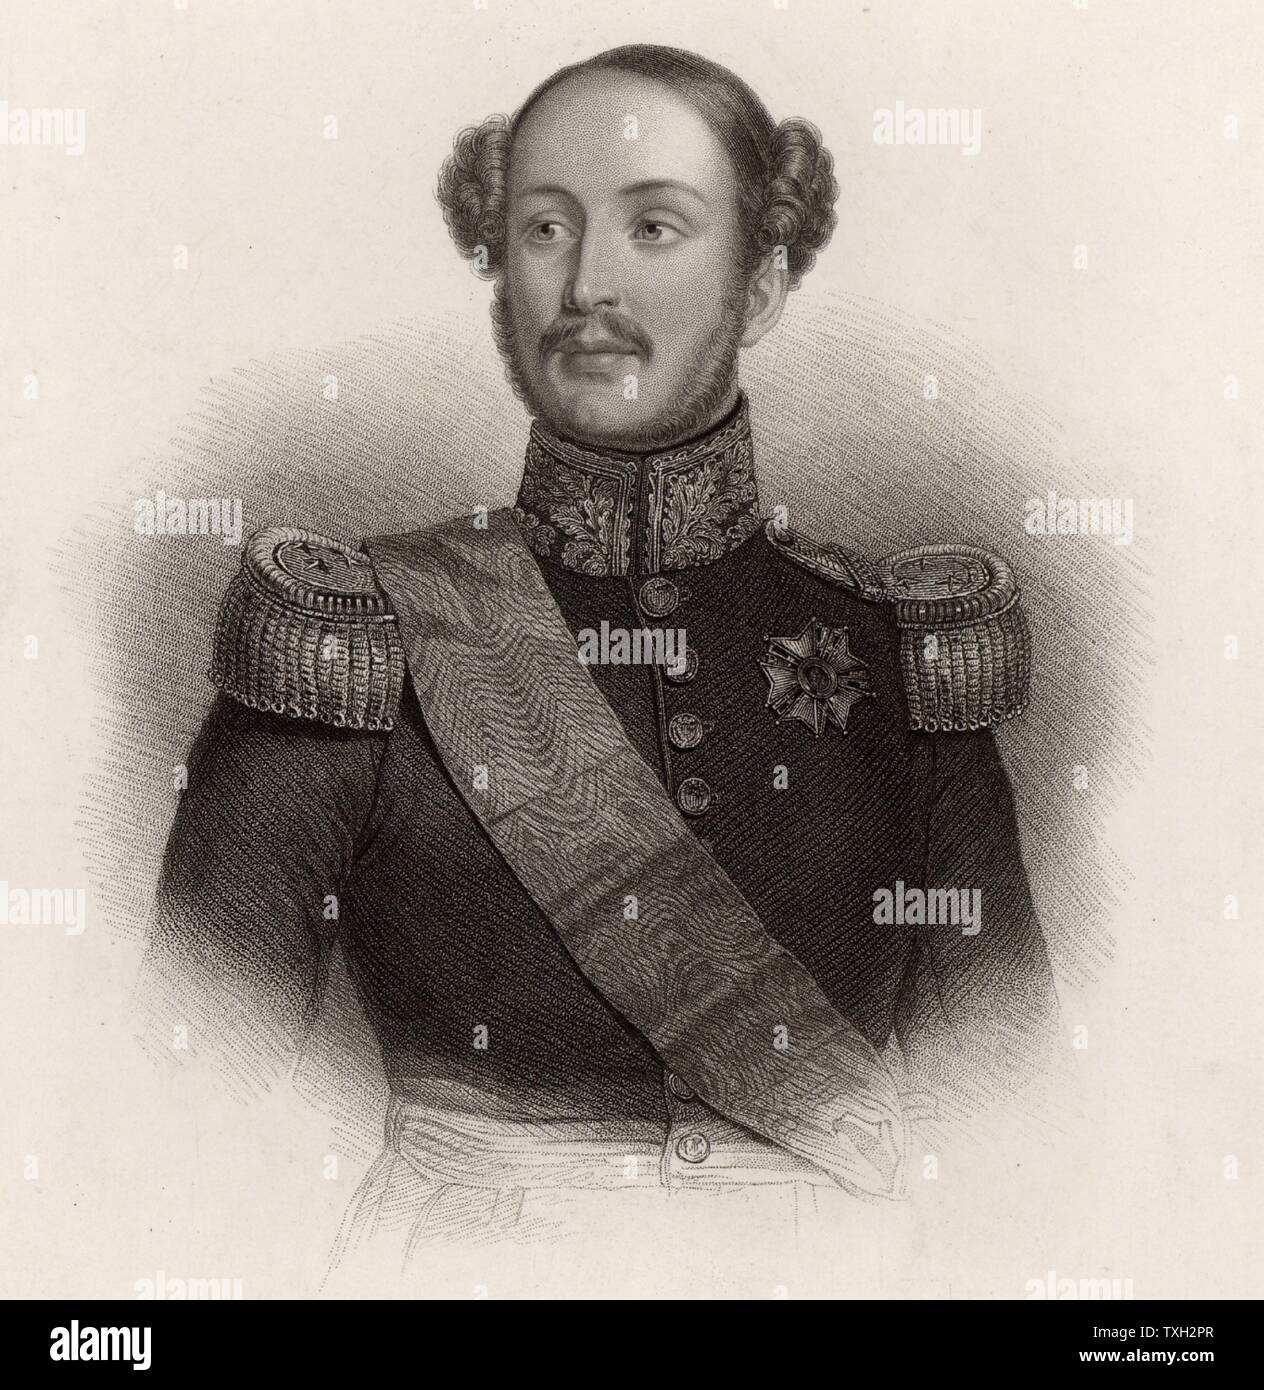 Ferdinand Philippe, Duc d'Orleans (1810-42) eldest son of French king Louis-Philippe. Heir to the throne of France, he served as general in French army. Killed in a carriage accident.  Engraving. Stock Photo